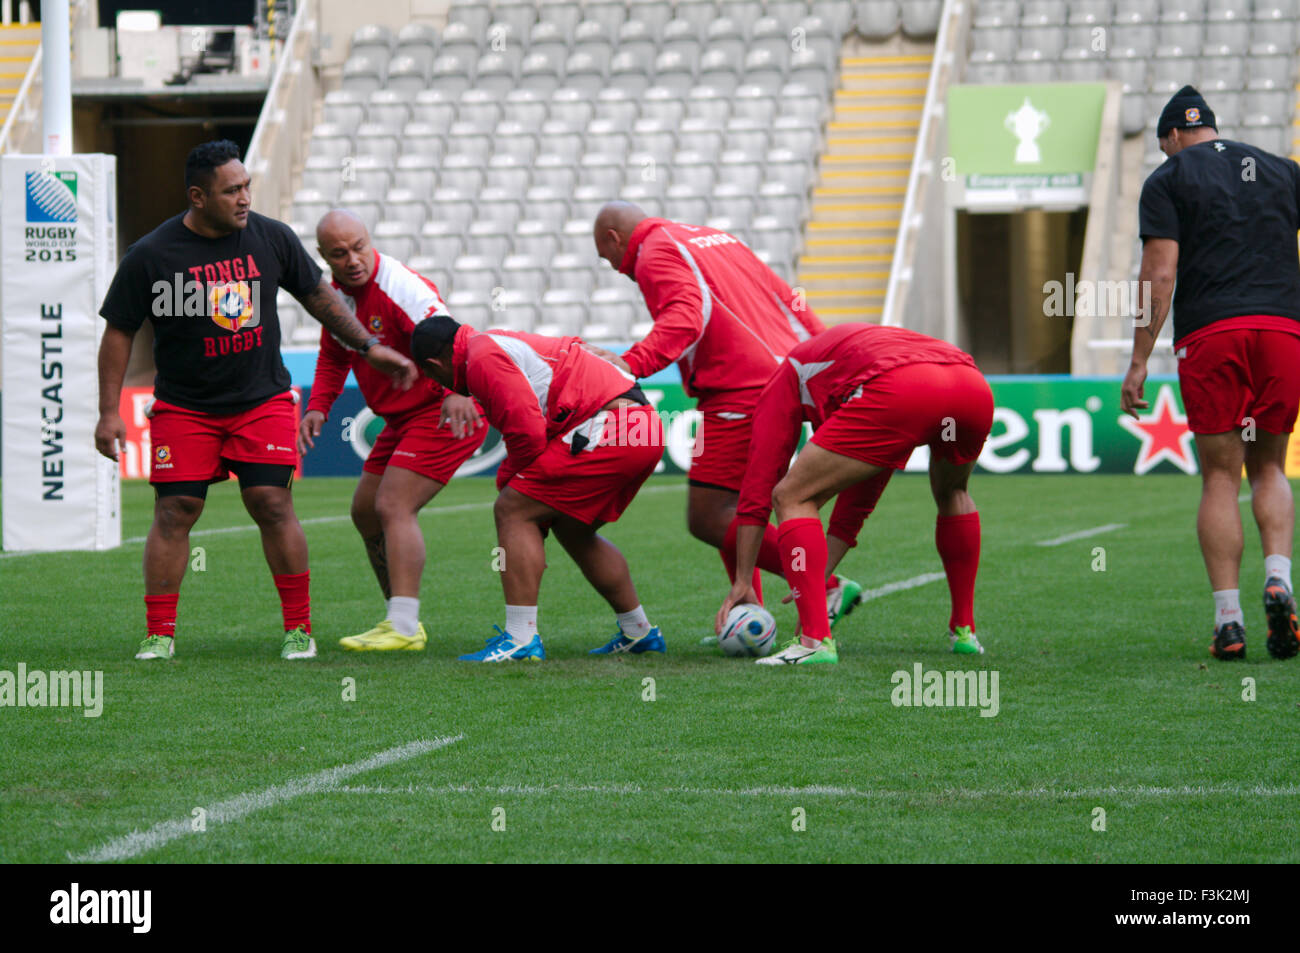 Newcastle upon Tyne, UK, 8 October 2015, The Tongan rugby squad practicing during Captain’s run at St James Park prior to their match against New Zealand in the Rugby World Cup 2015, Credit: Colin Edwards/Alamy Live News Stock Photo